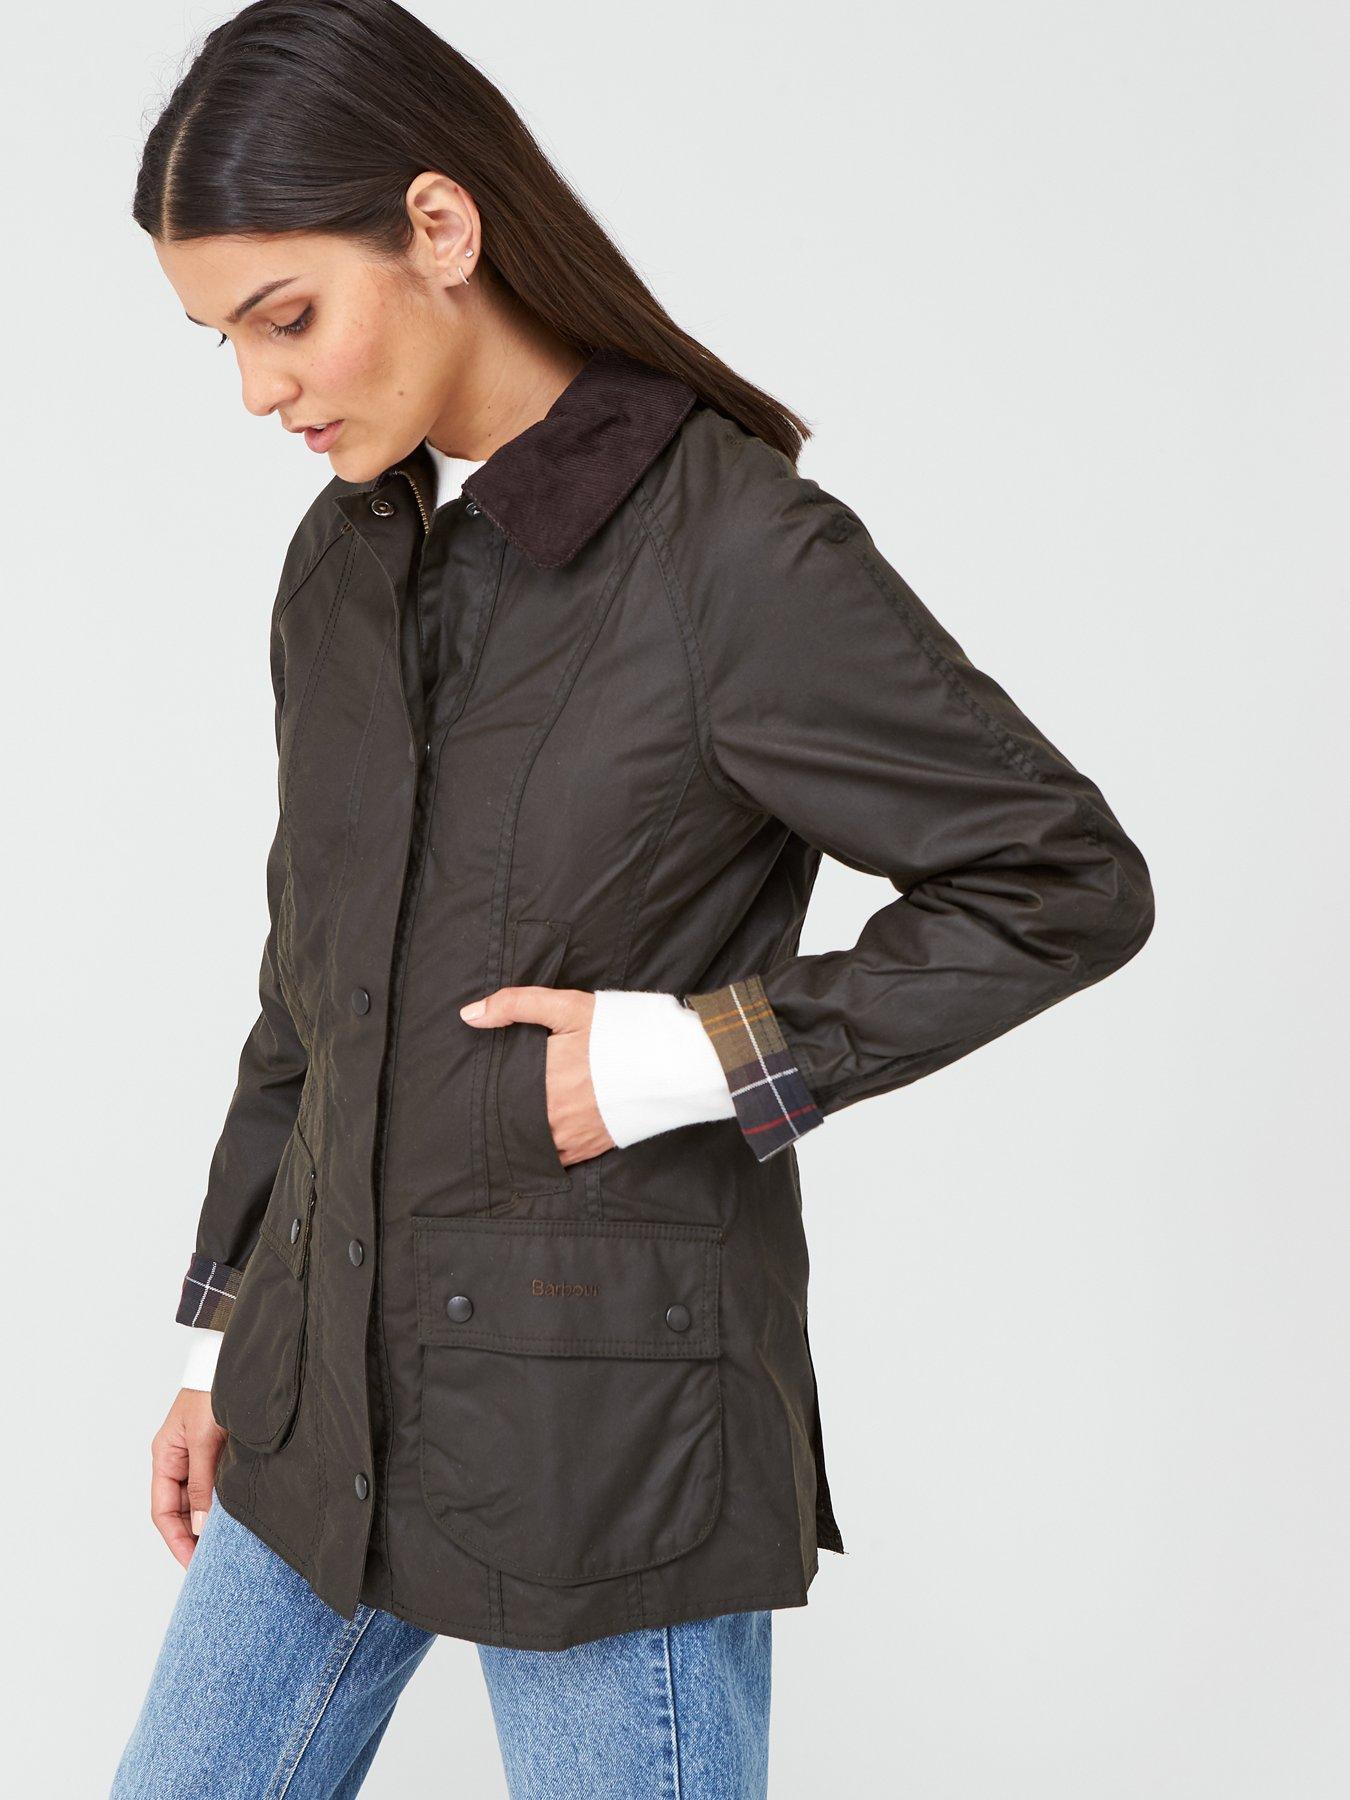 barbour womens jackets ireland Cheaper 